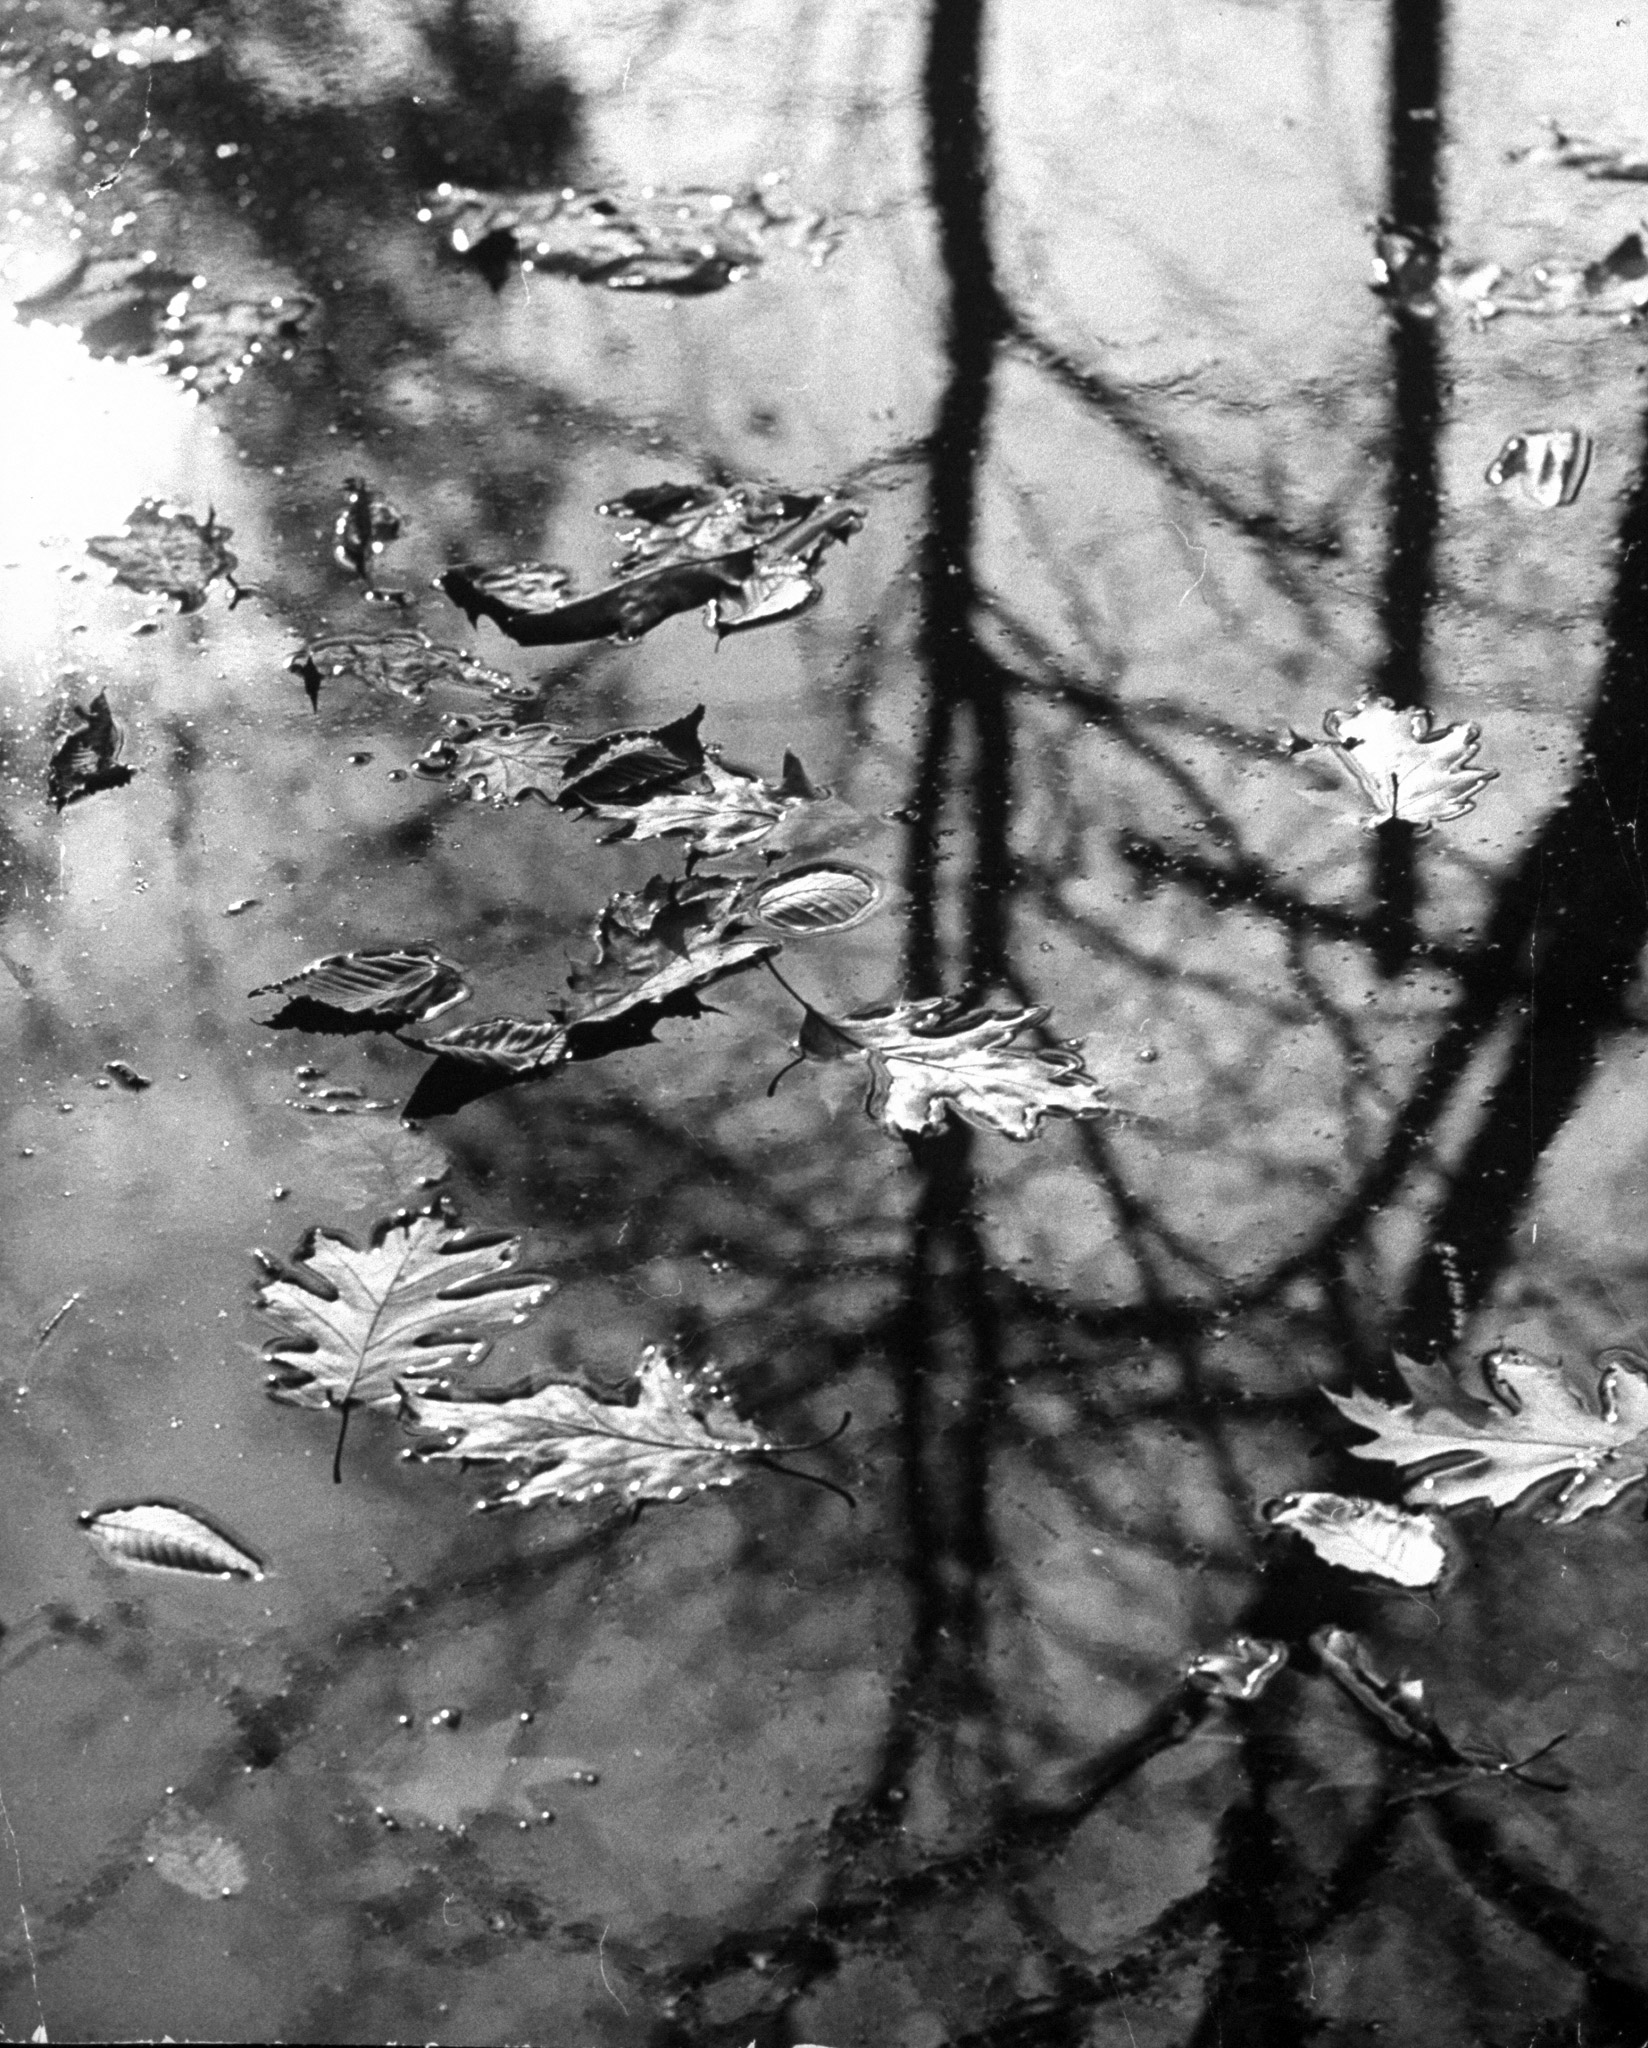 Autumn leaves floating on the water.